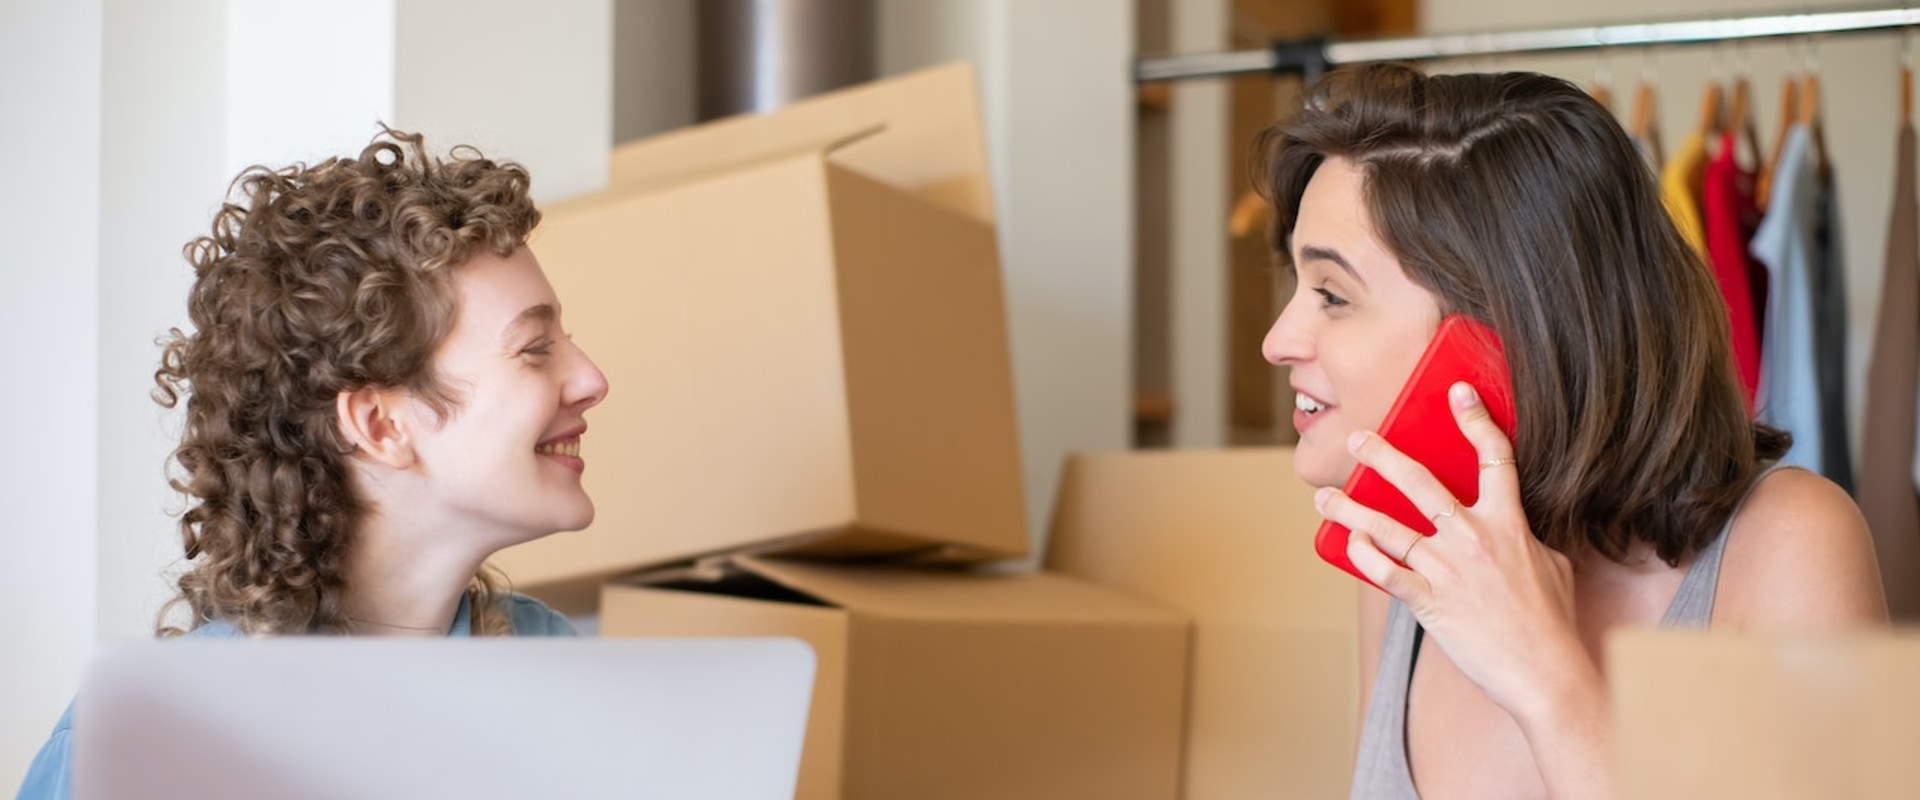 Cost Comparisons: Finding the Best Shipping Method and Cost for You